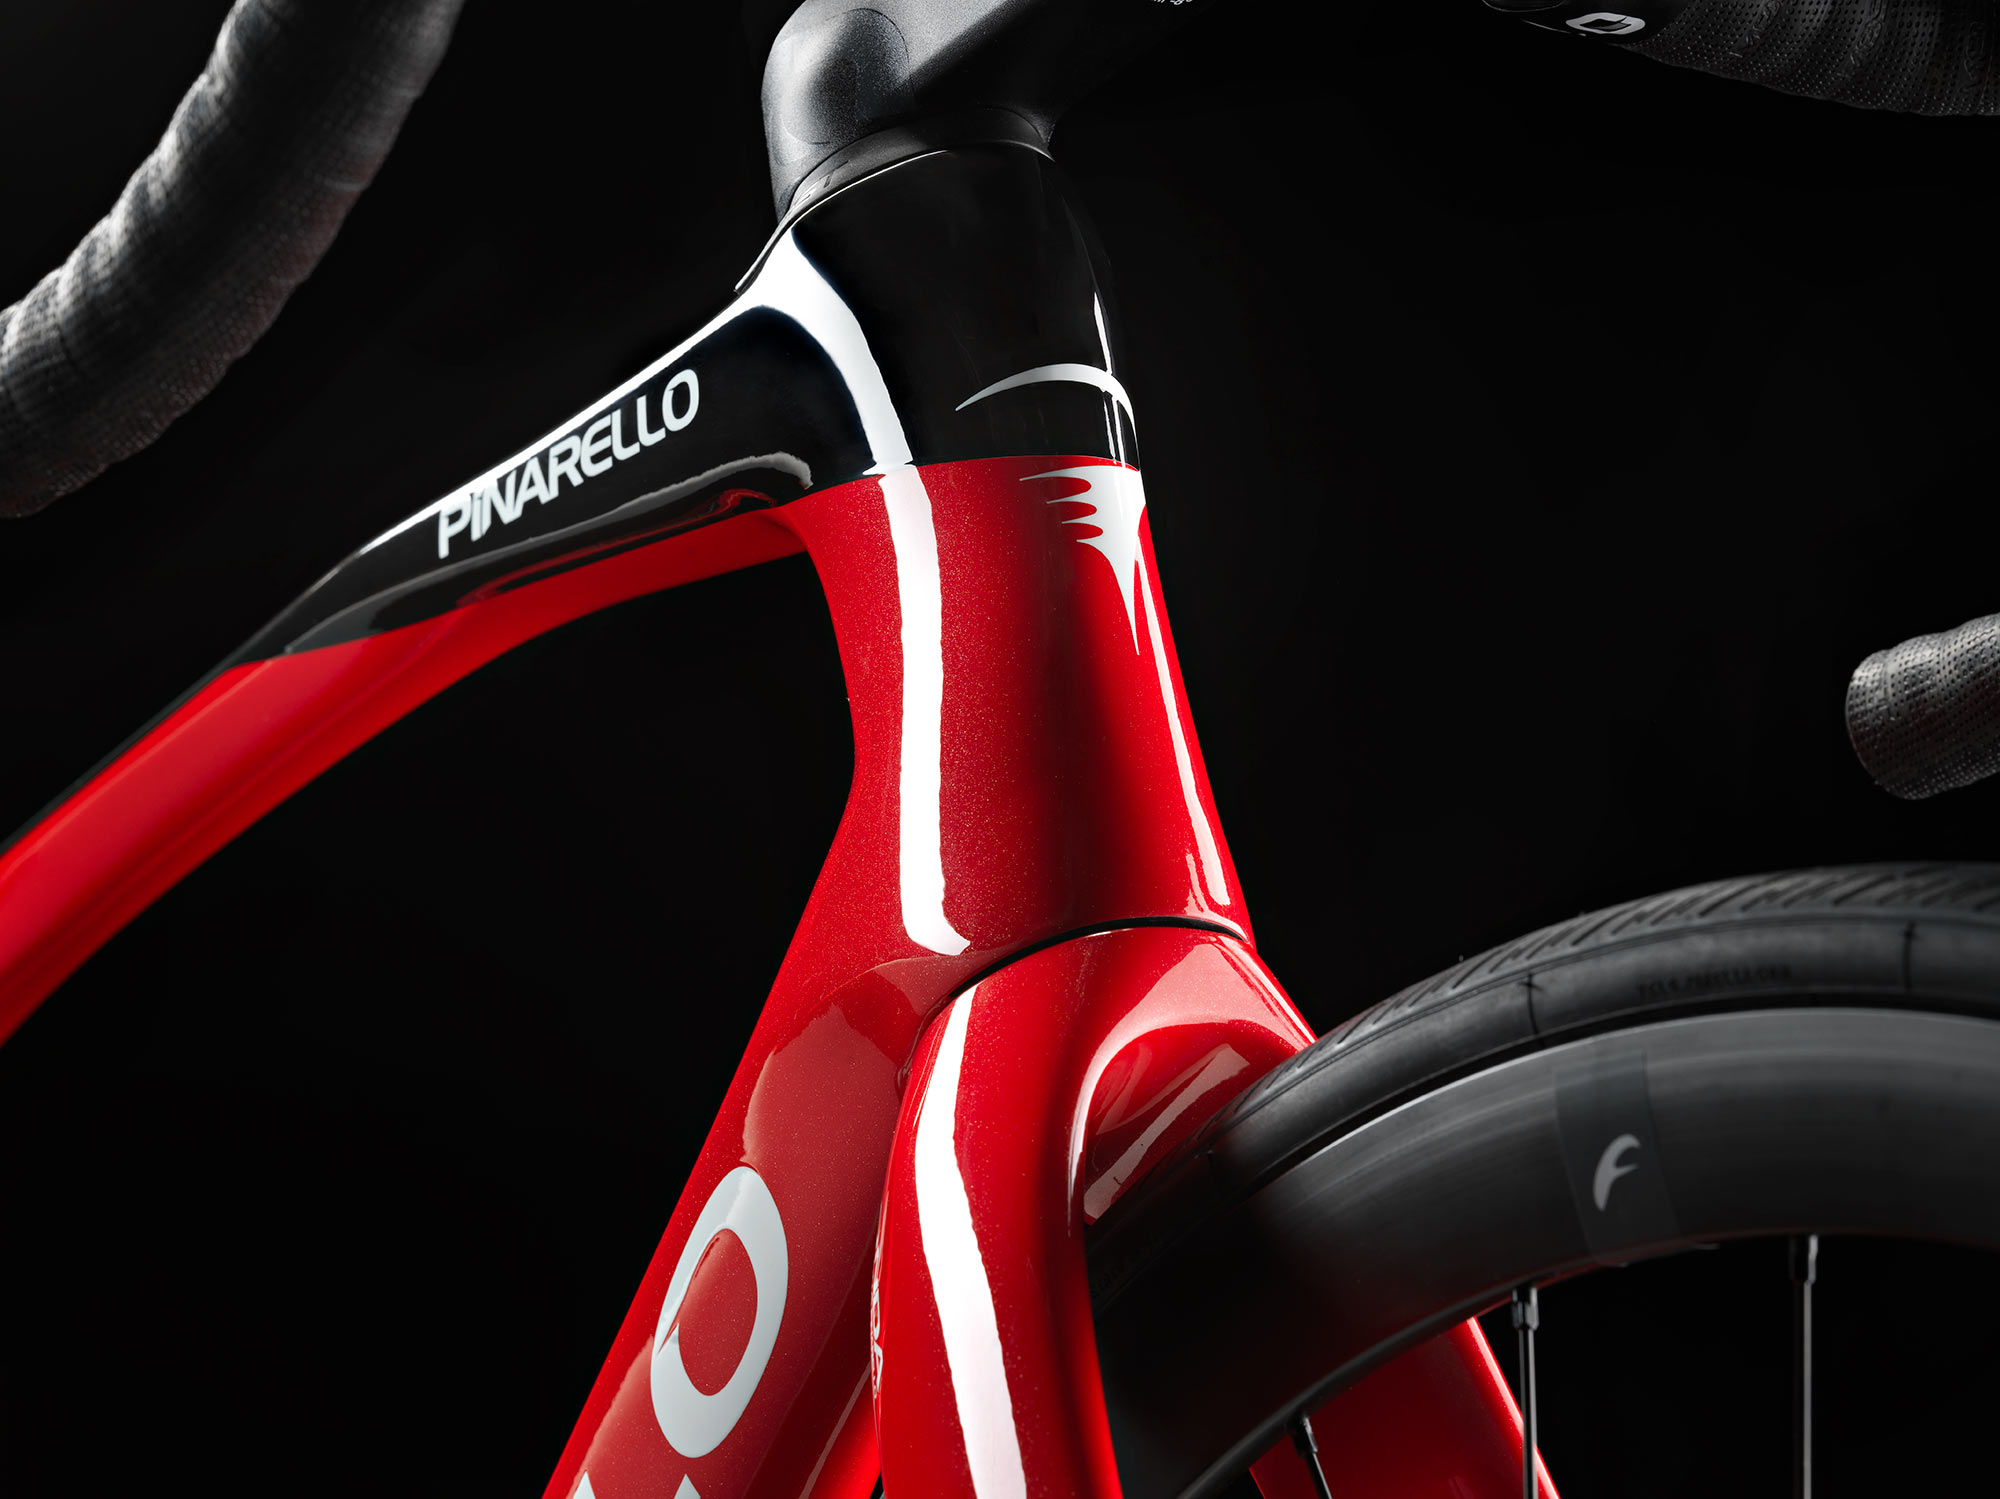 New Pinarello Paris Bike First Look: Finding An All-Day Accord